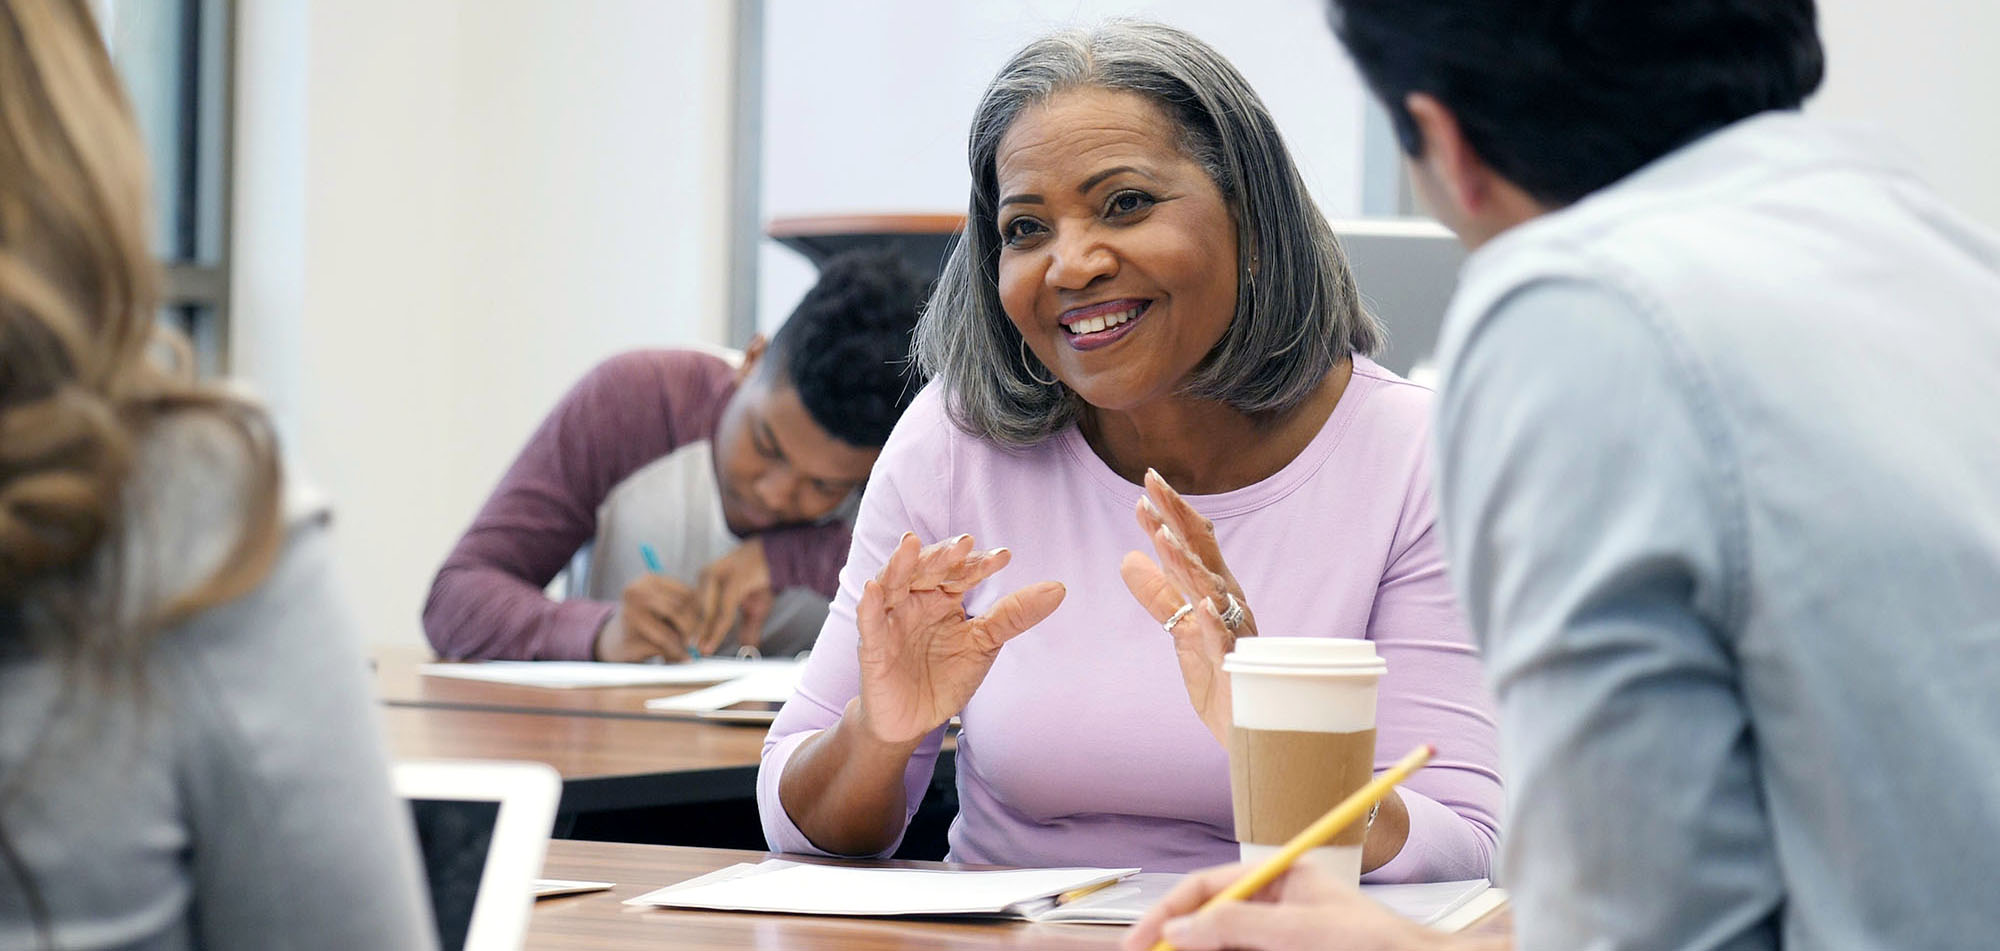 Beautiful mature African American female college student gestures as she discusses something during a study group session with classmates.